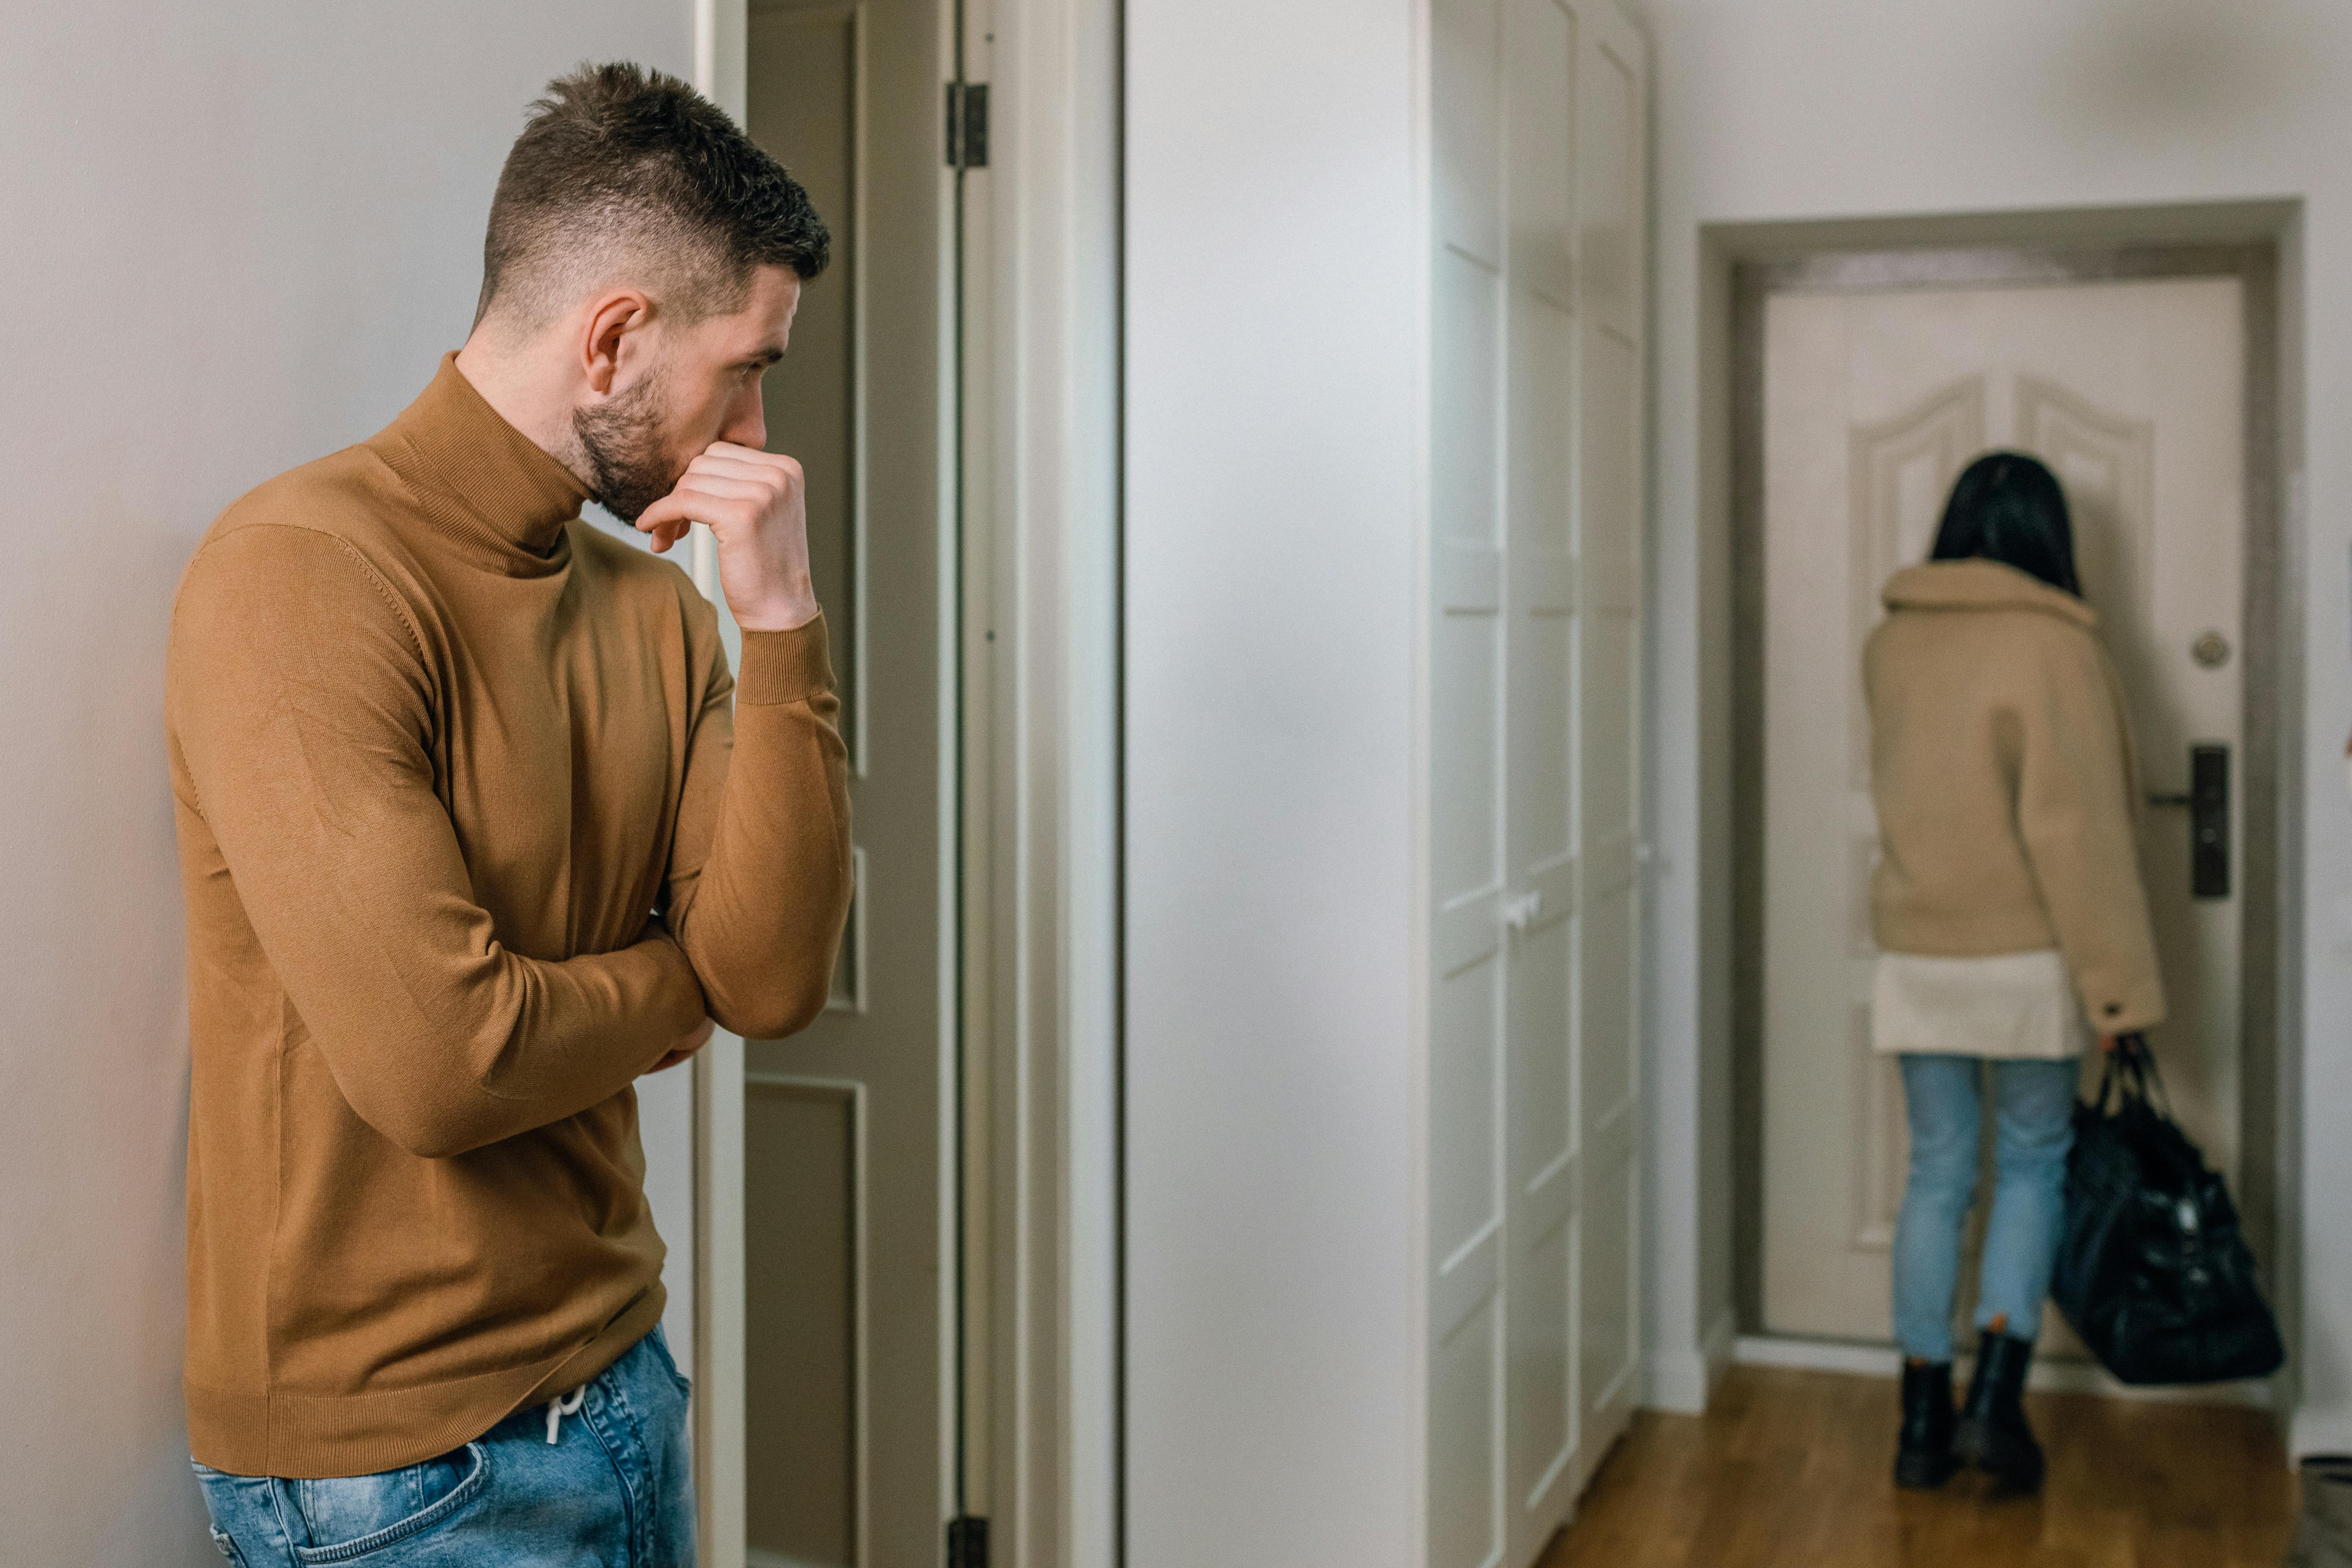 A man watching as his partner leaves their apartment with a bag | Source: Pexels